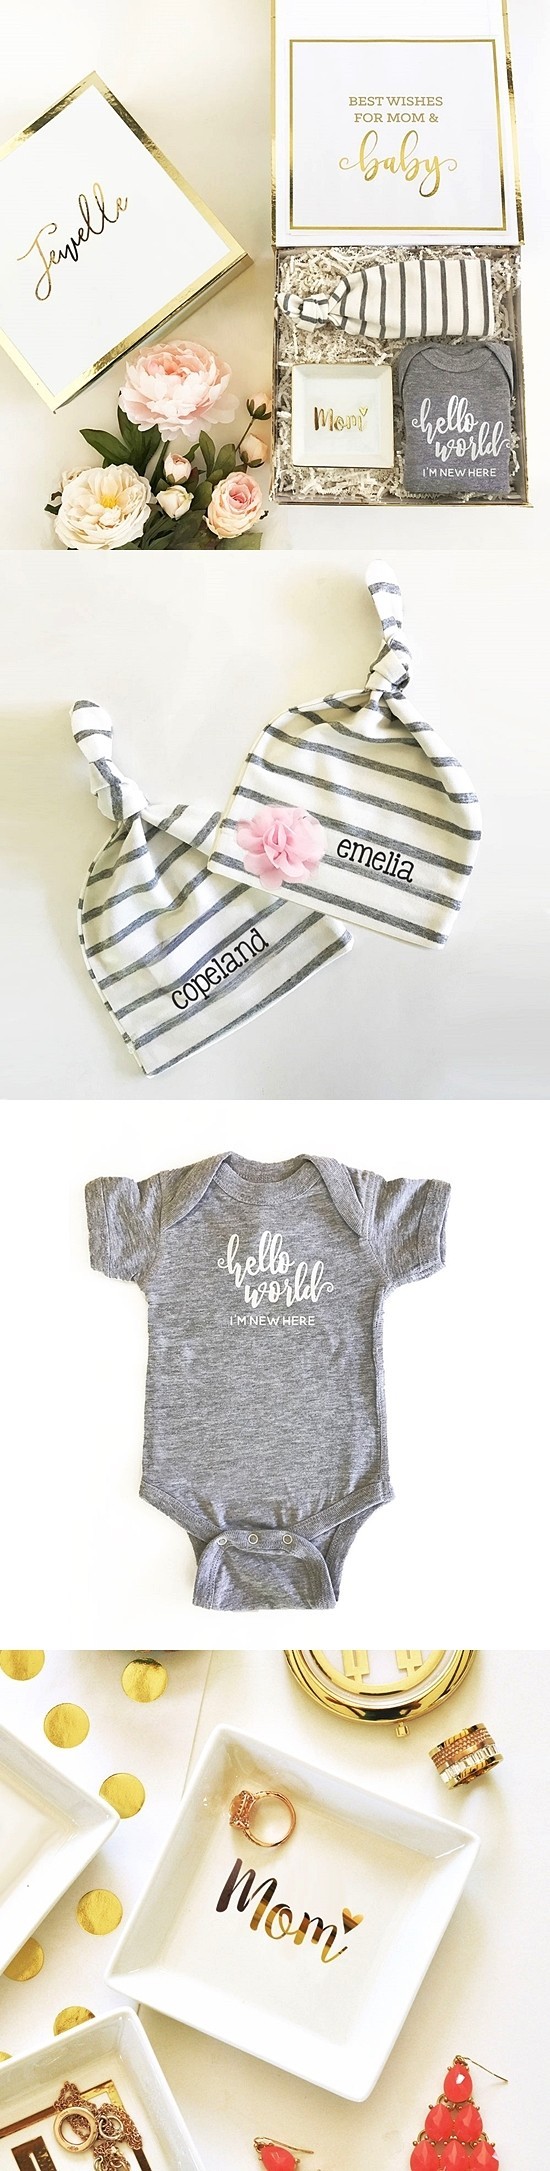 Gift Set for New Mom and Baby in Personalized White & Gold Gift Box